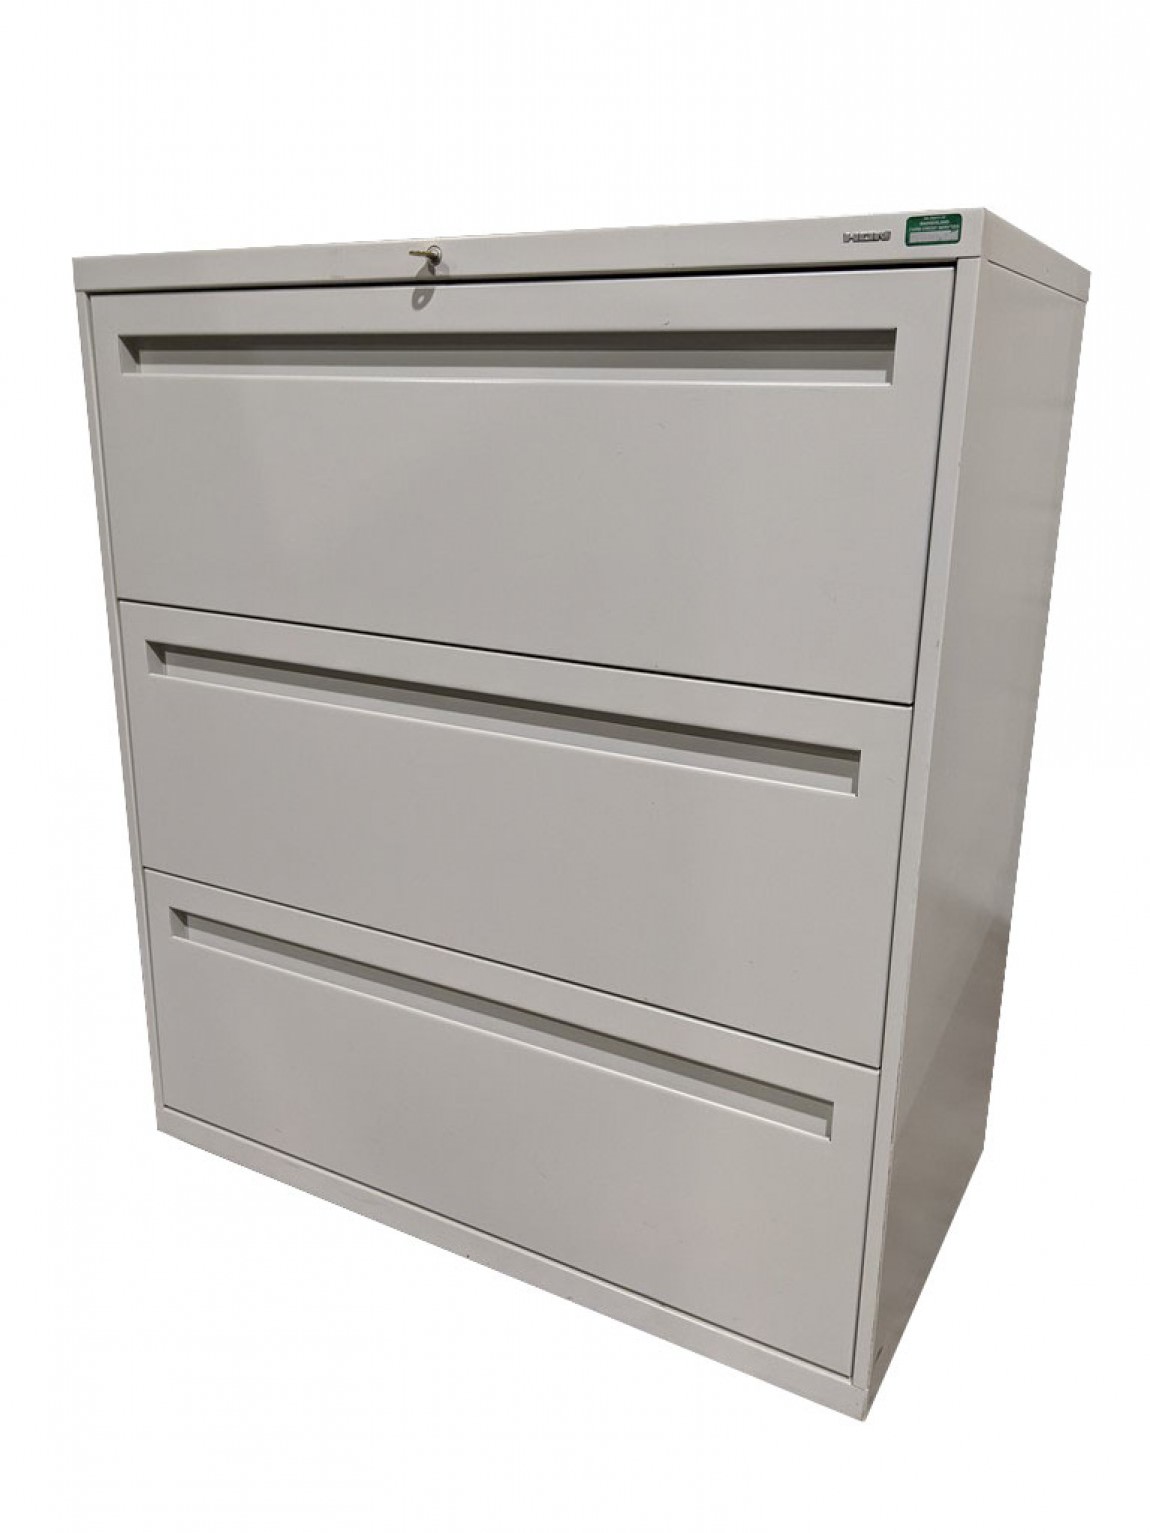 Putty Hon 3 Drawer Lateral Filing Cabinet 36 Inch Wide